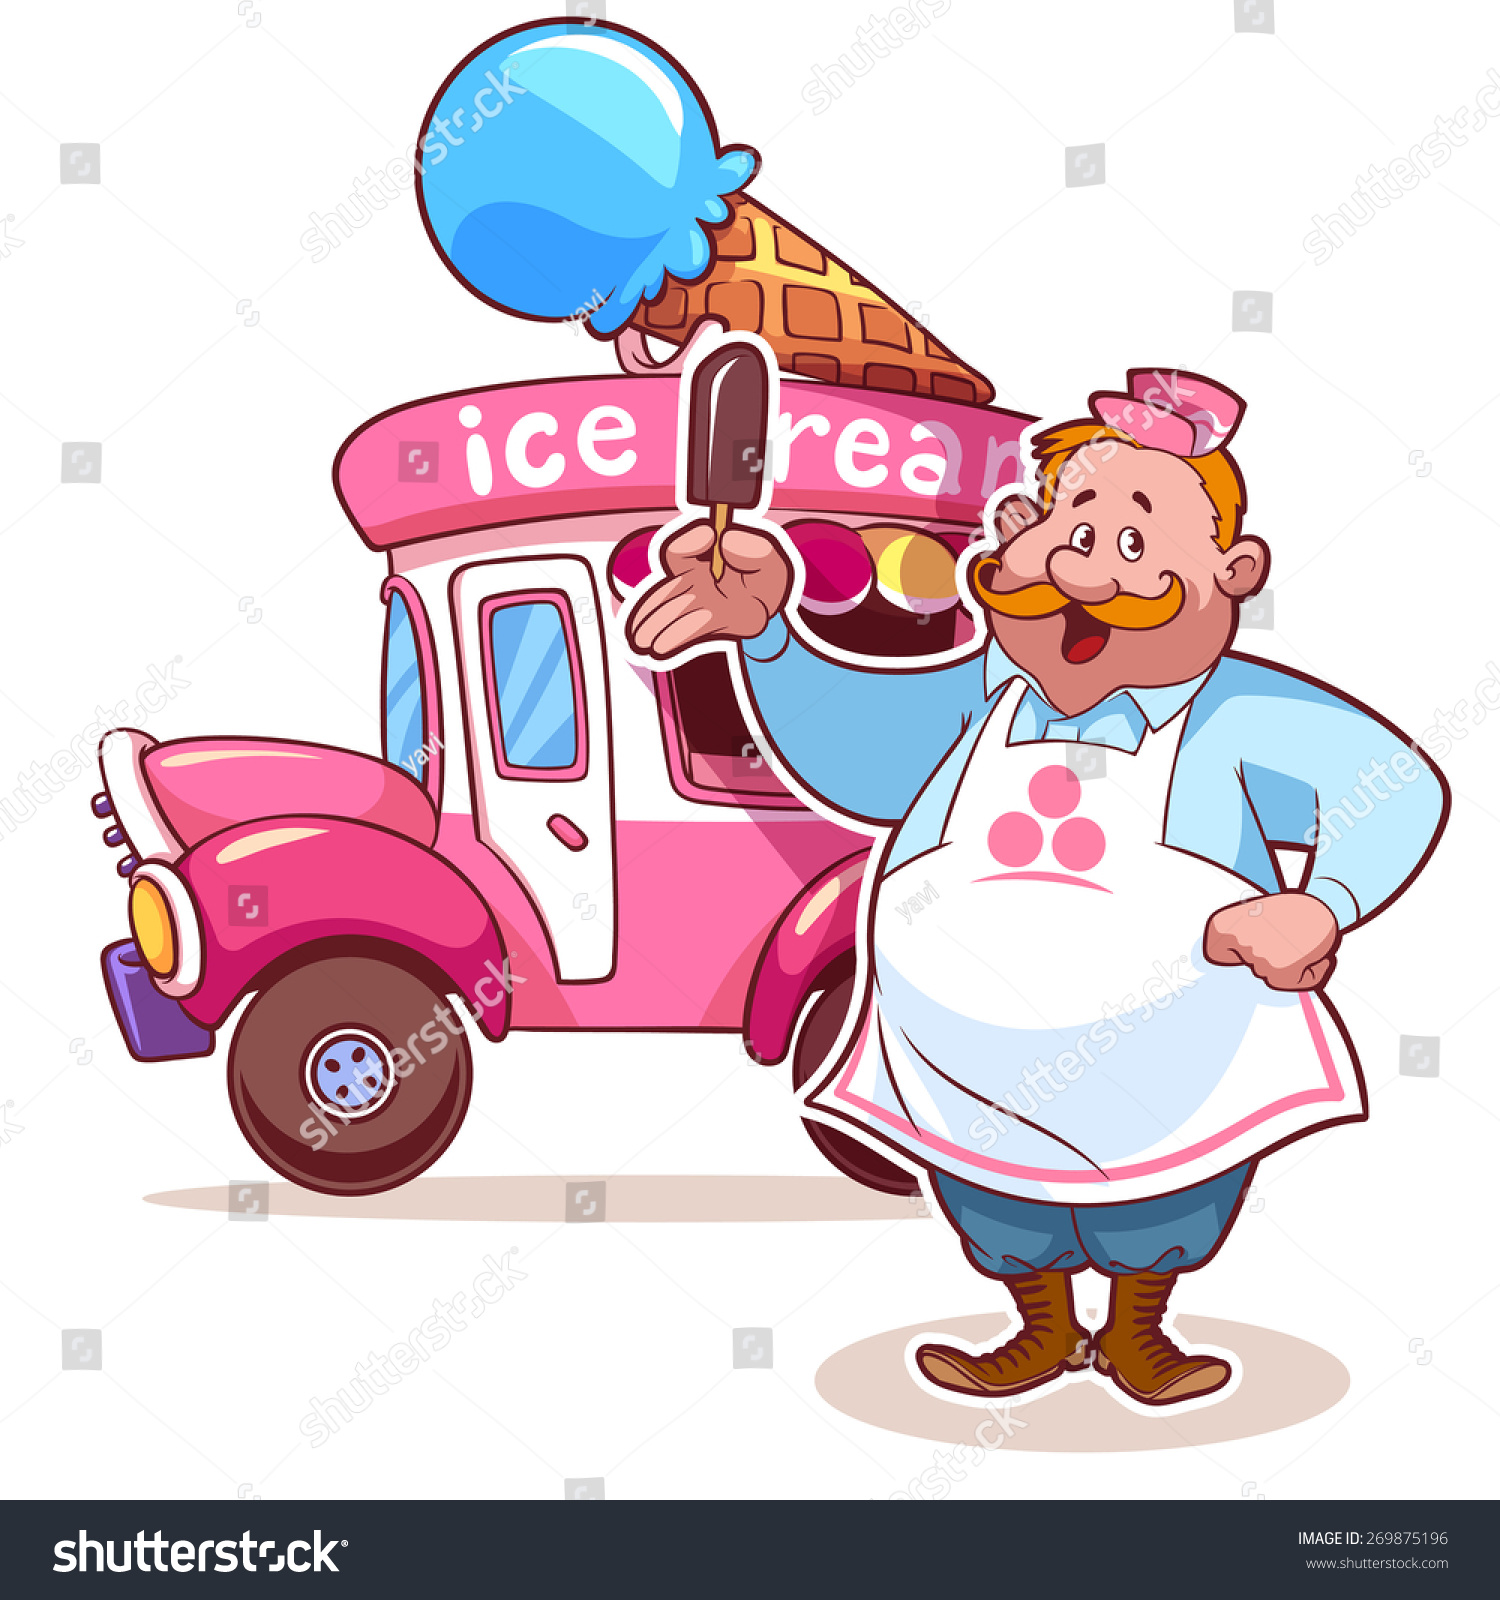 Cartoon Ice Cream Car With The Seller. Fat Man In Apron ...